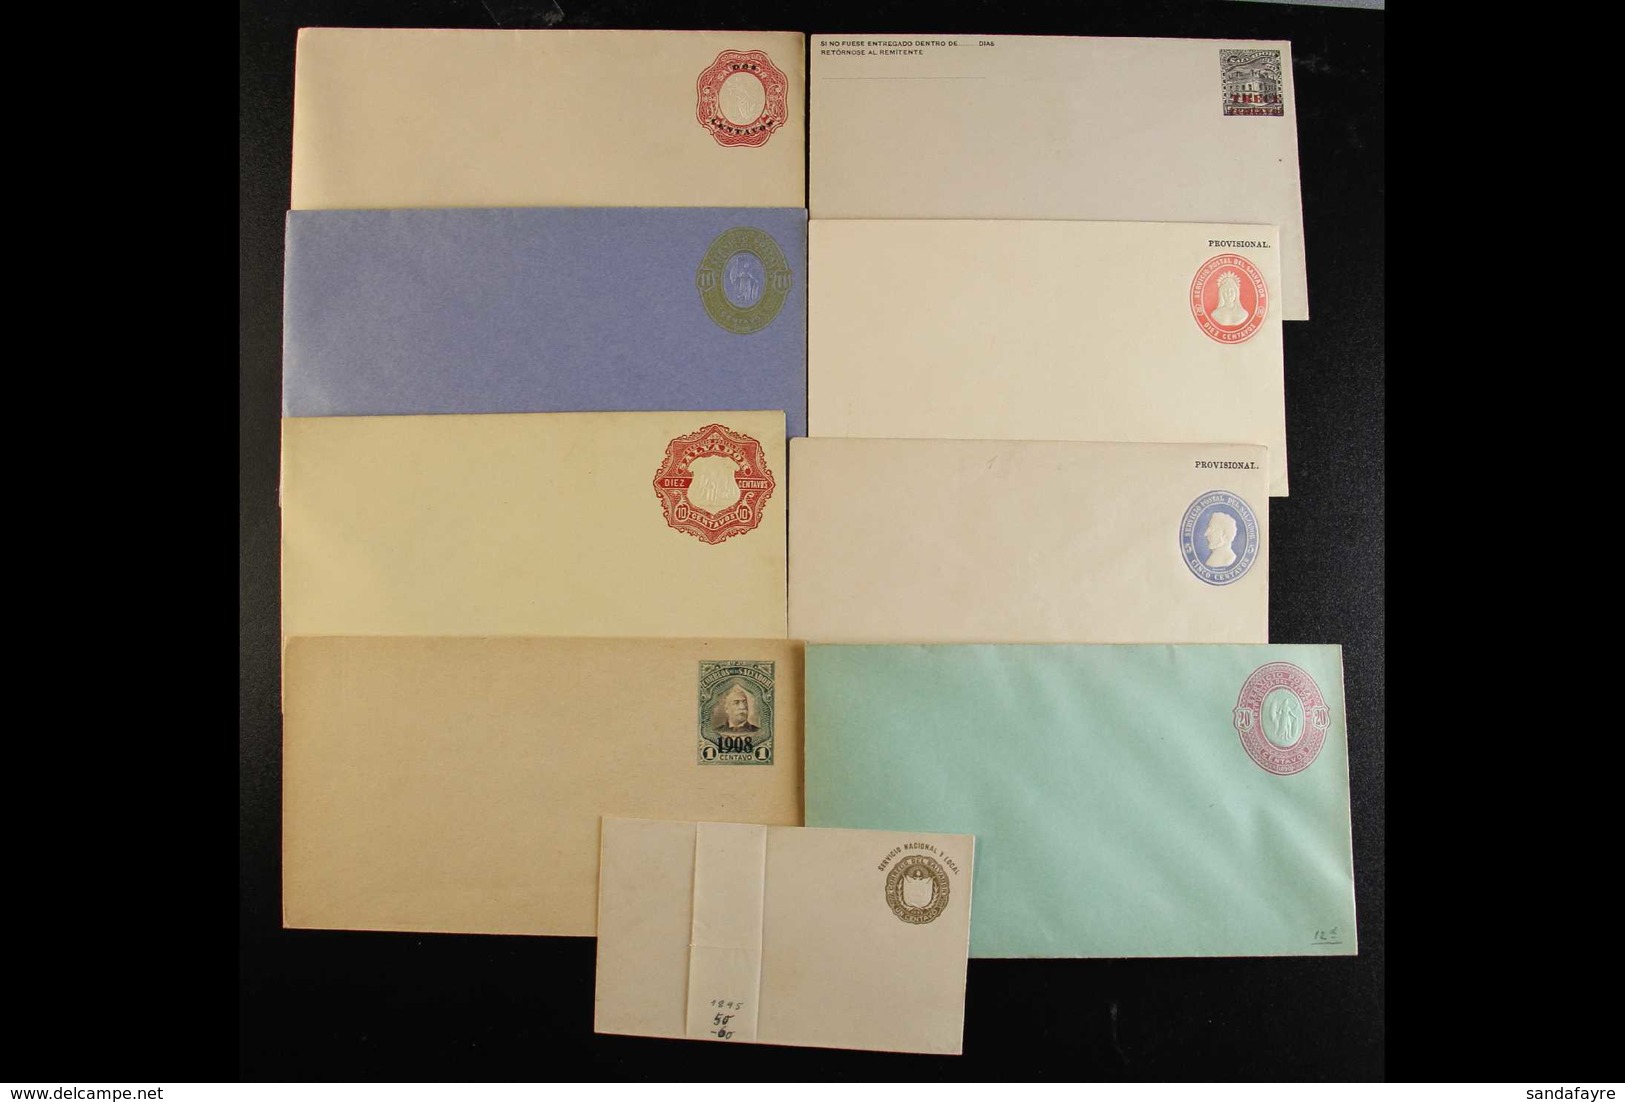 1887-1912 POSTAL STATIONERY  Unused Range Of ENVELOPES With A Good Range Of Issued Types, Different Denominations And Si - Salvador